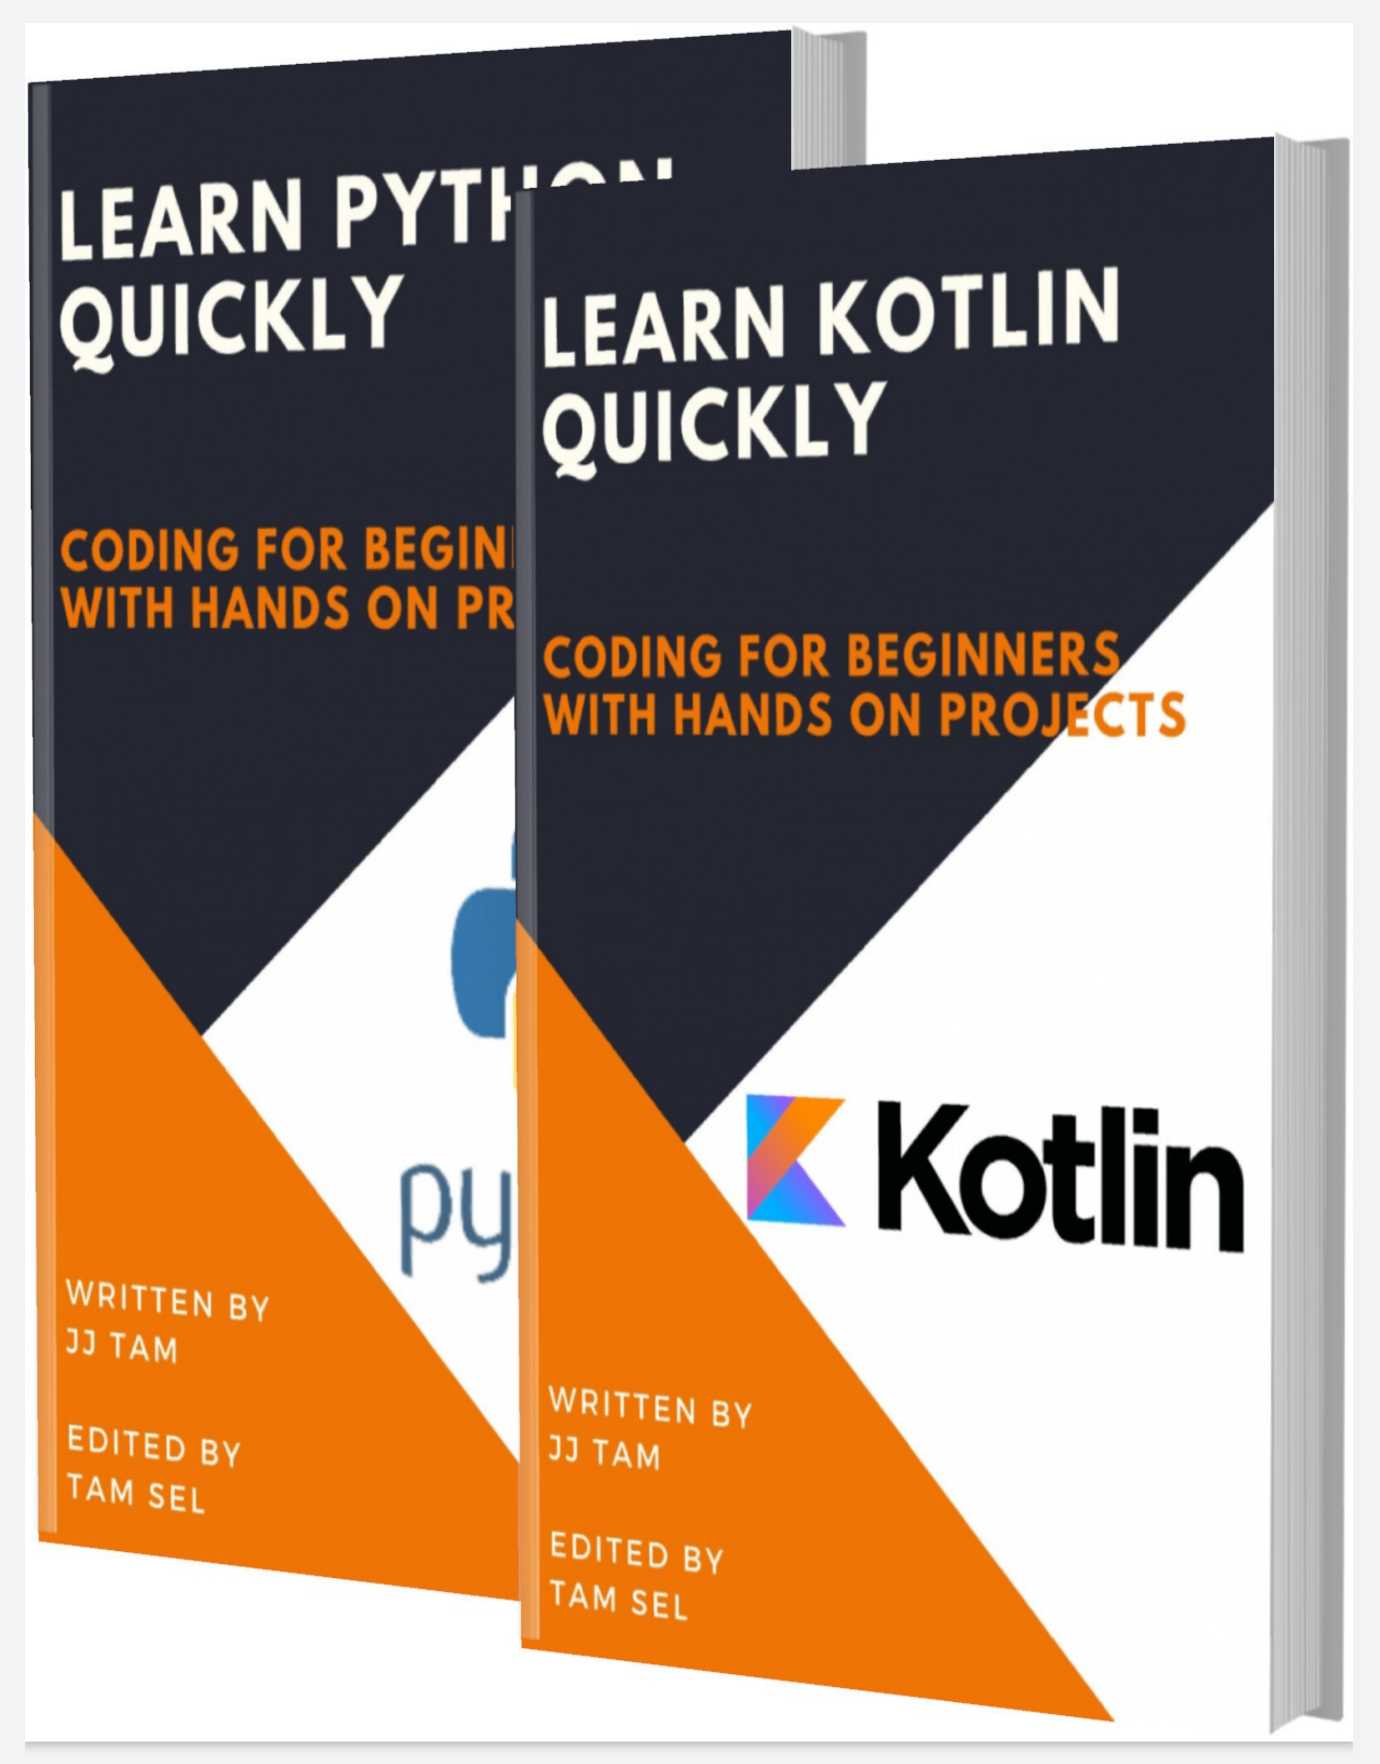 LEARN KOTLIN AND PYTHON: Coding For Beginners PDF